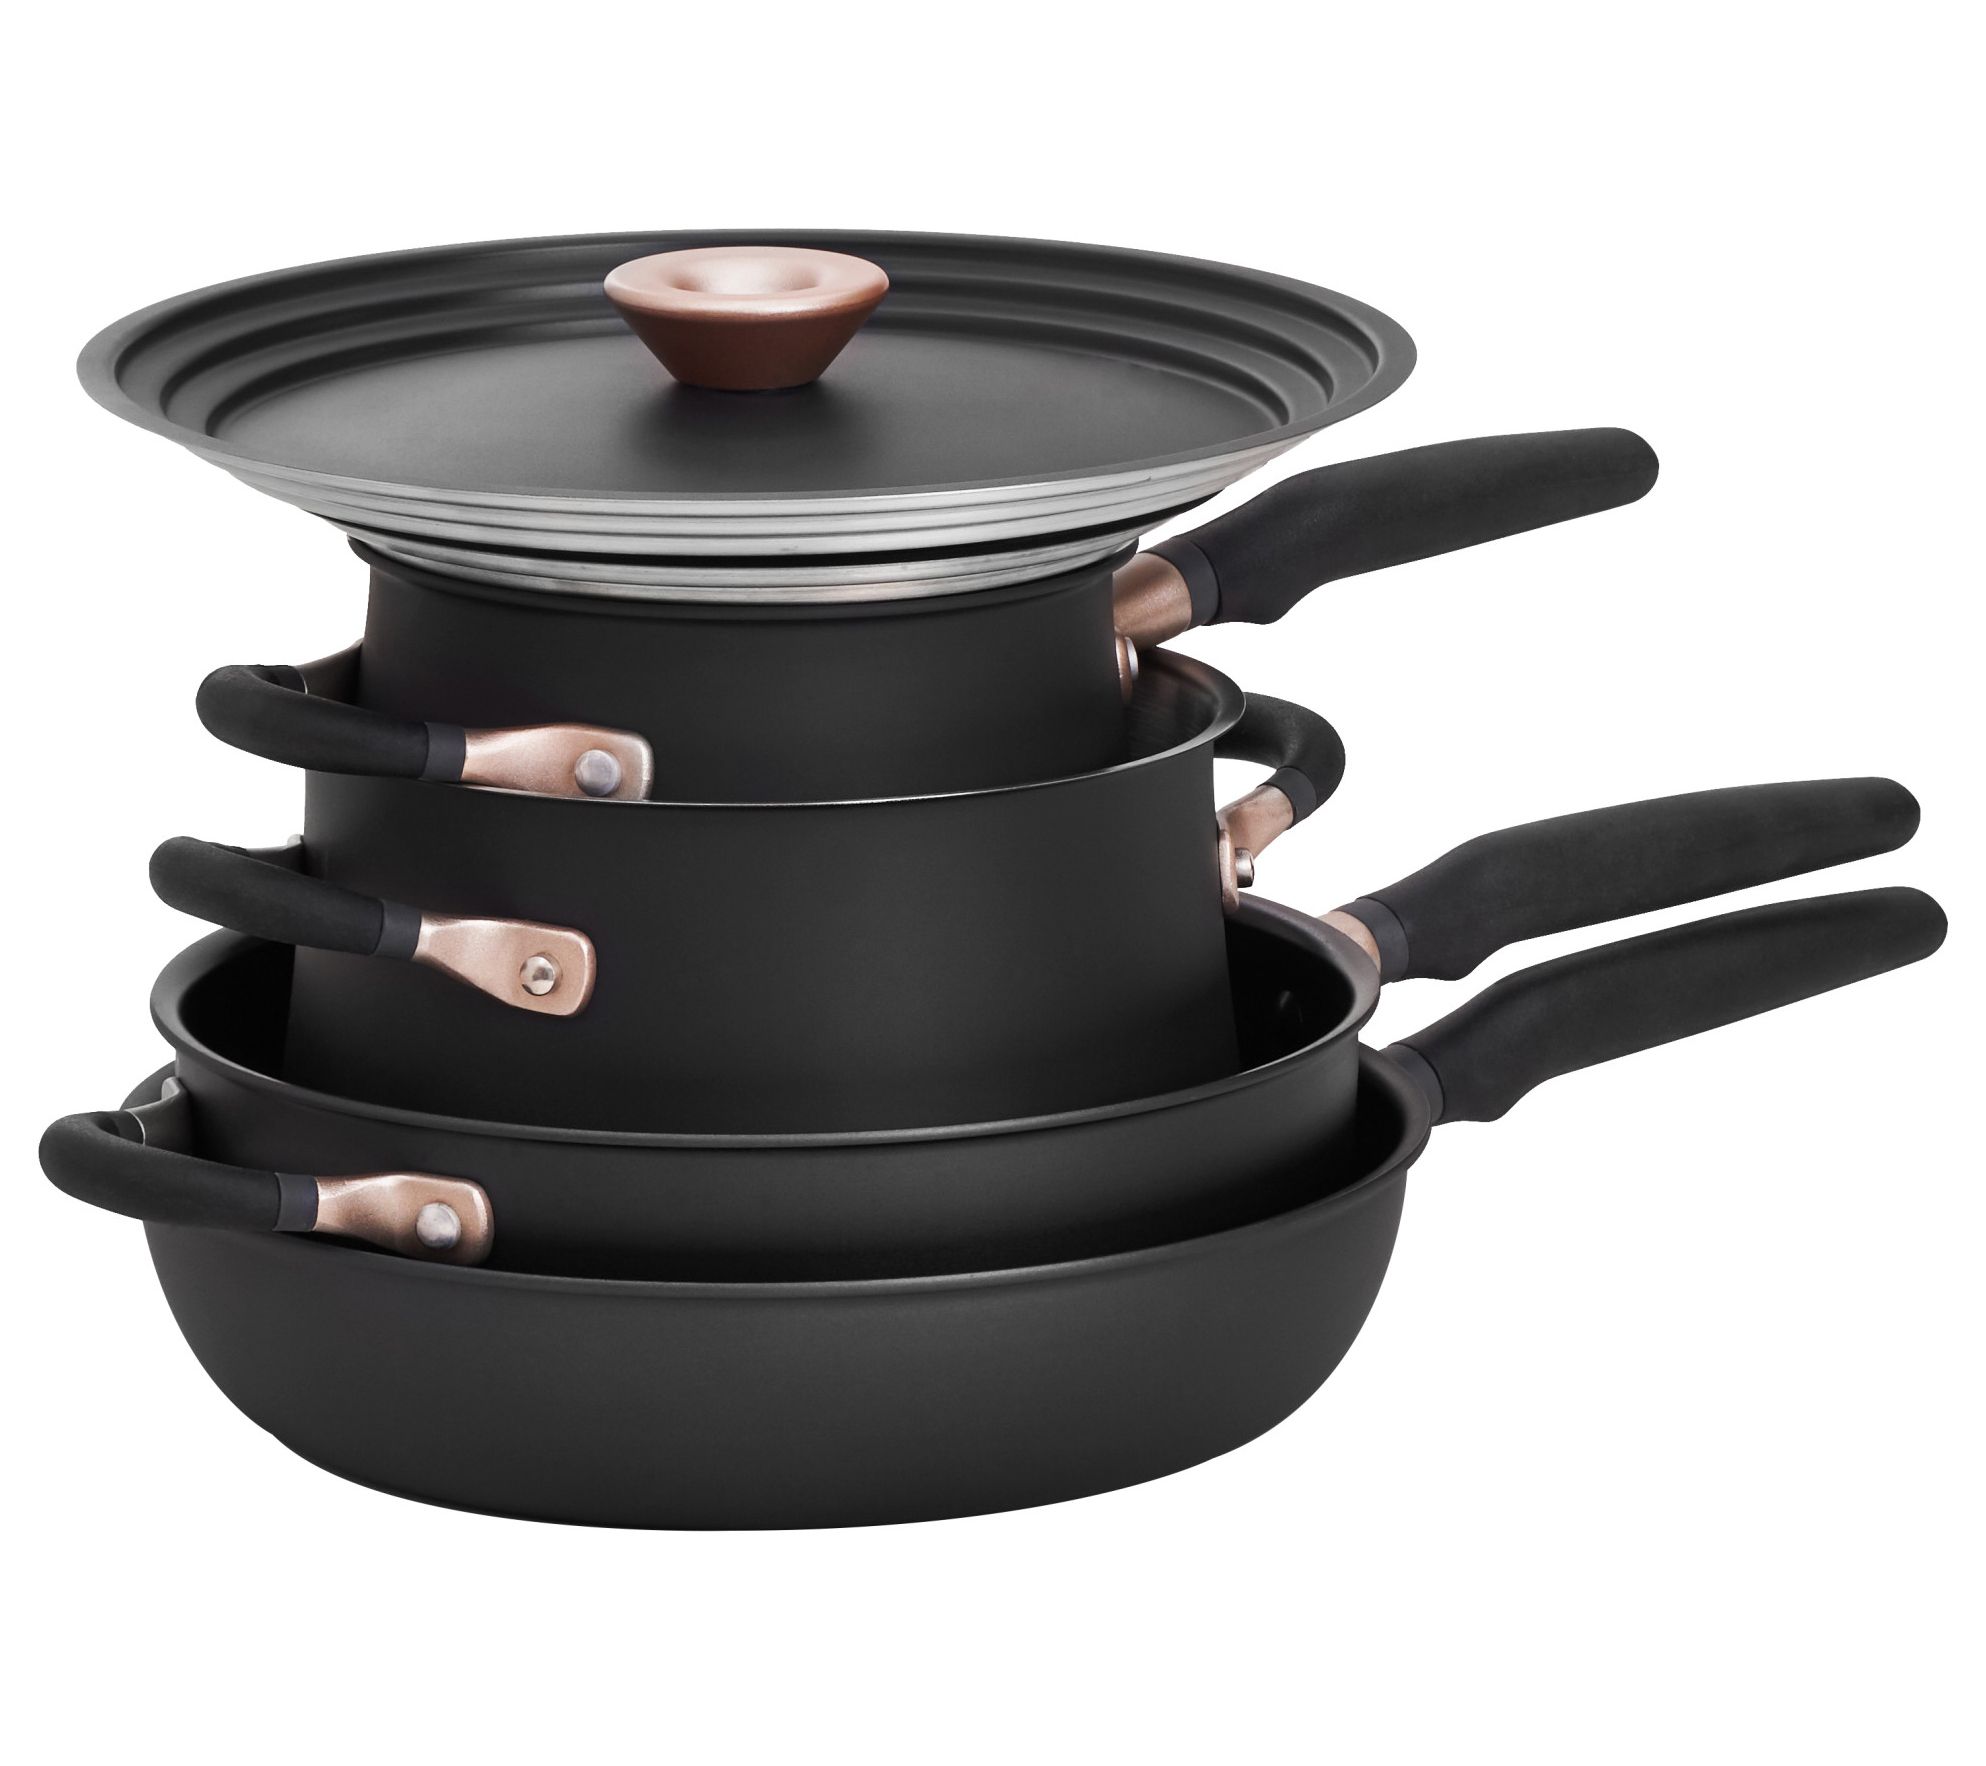 QVC: Save Big on a Set of the Internet's Favorite Nonstick Pans